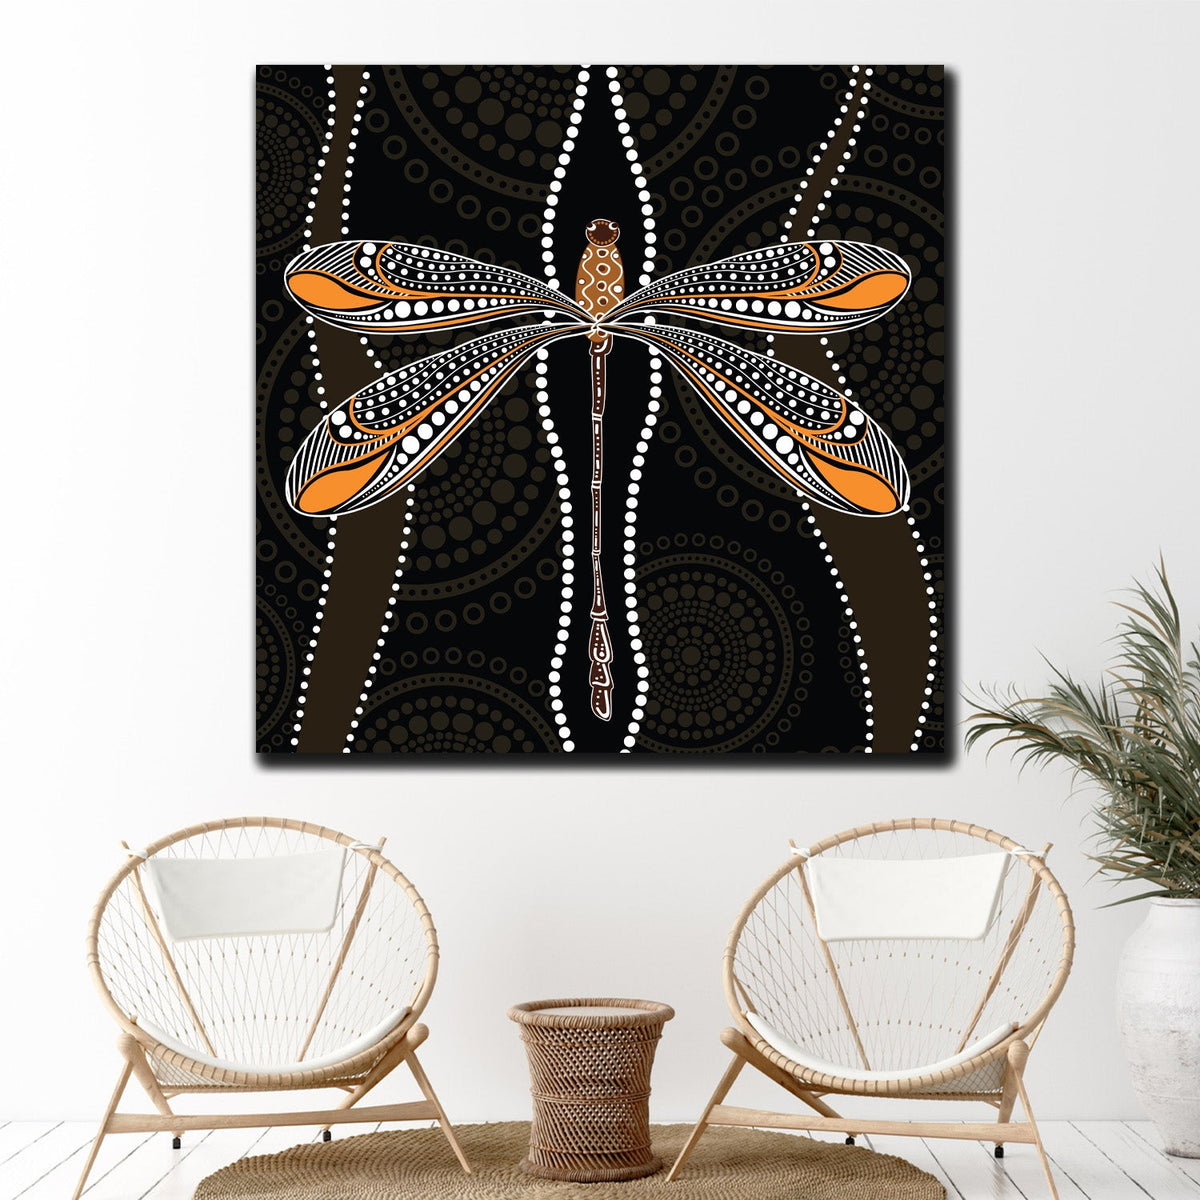 https://cdn.shopify.com/s/files/1/0387/9986/8044/products/DragonflyCanvasArtprintStretched-1.jpg